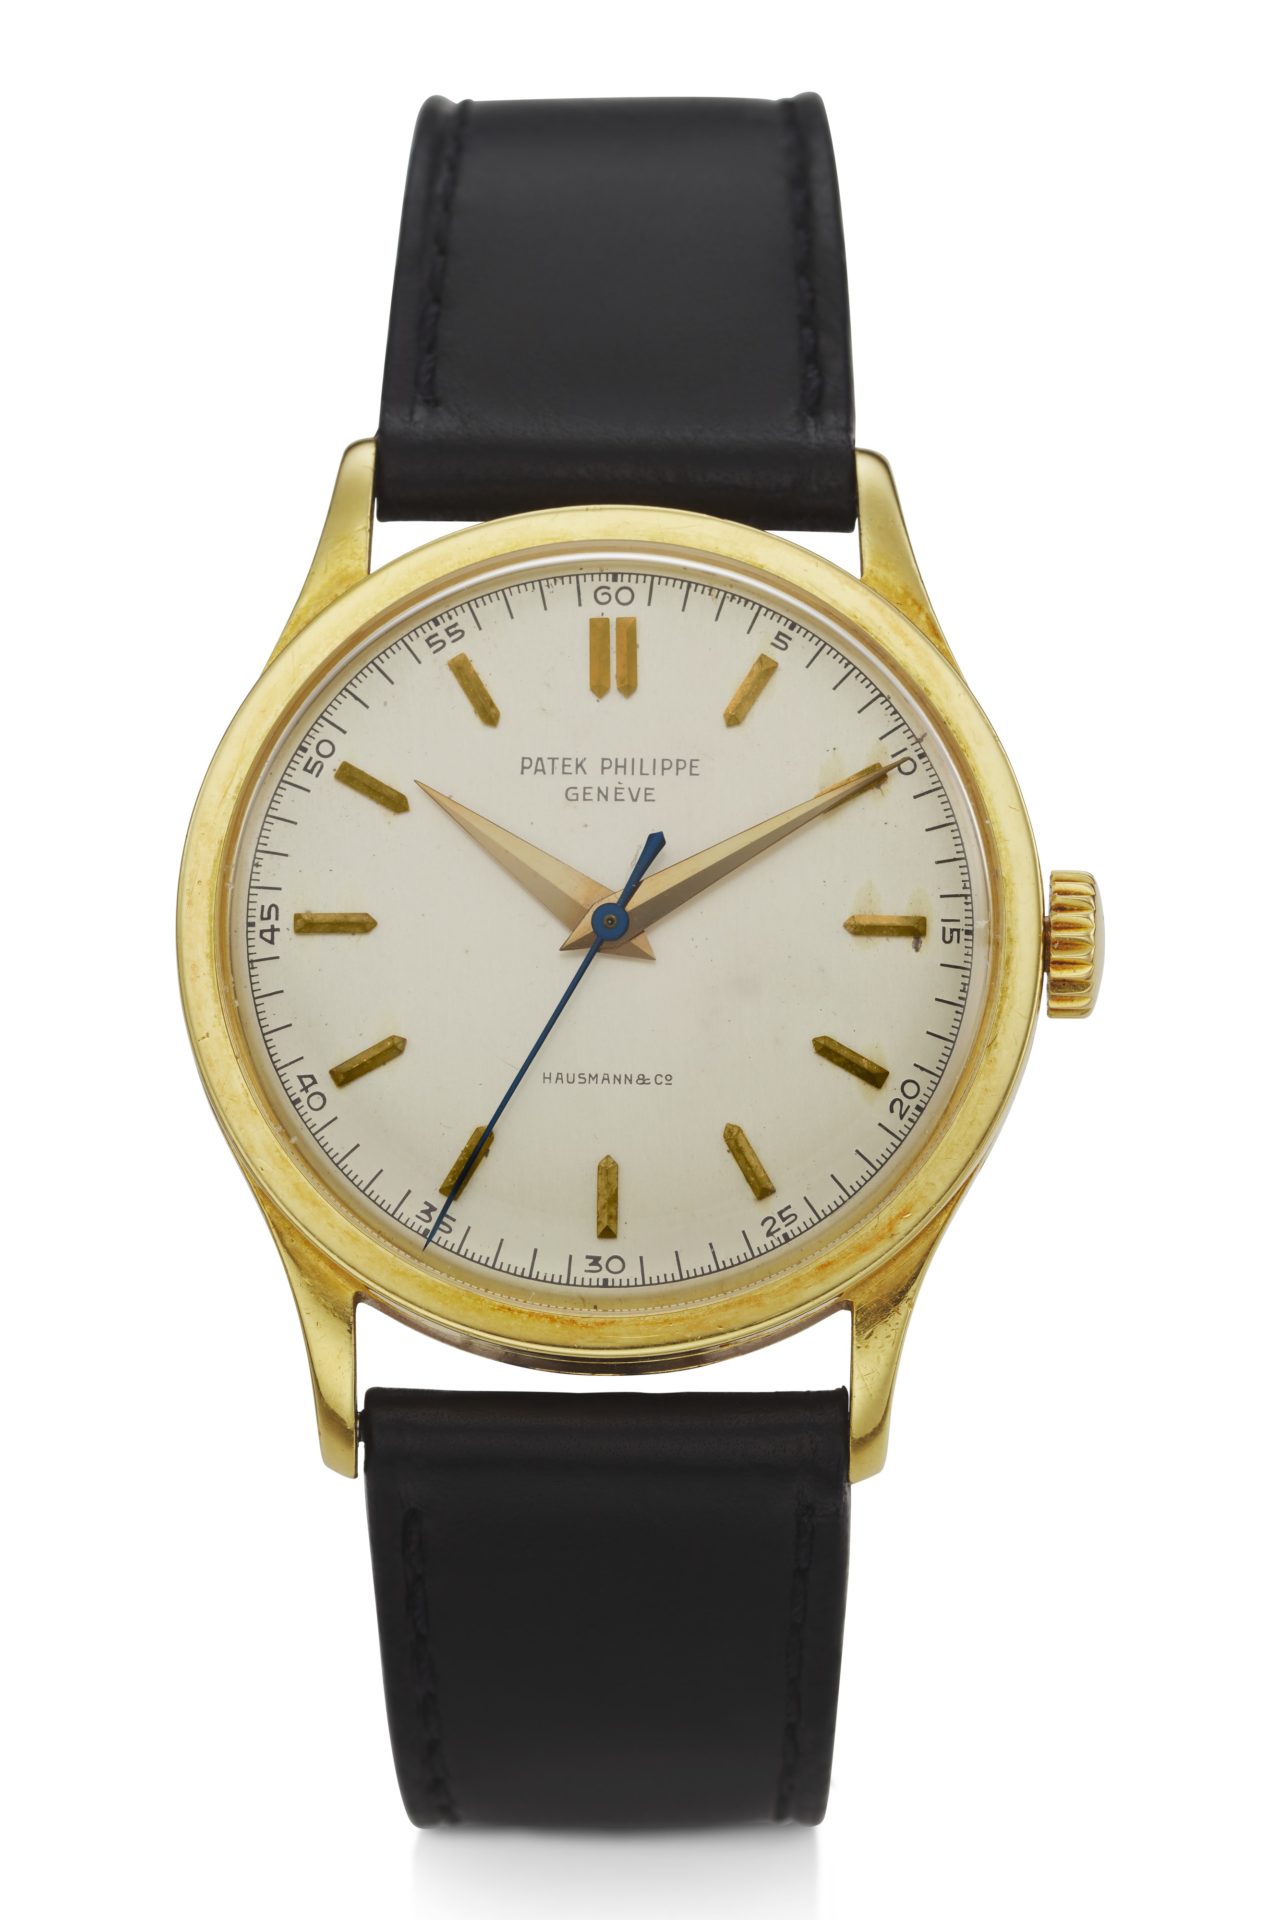 Patek philippe retailed by hausmann co. 18k gold wristwatch ref. 570 formerly owned by andy warhol